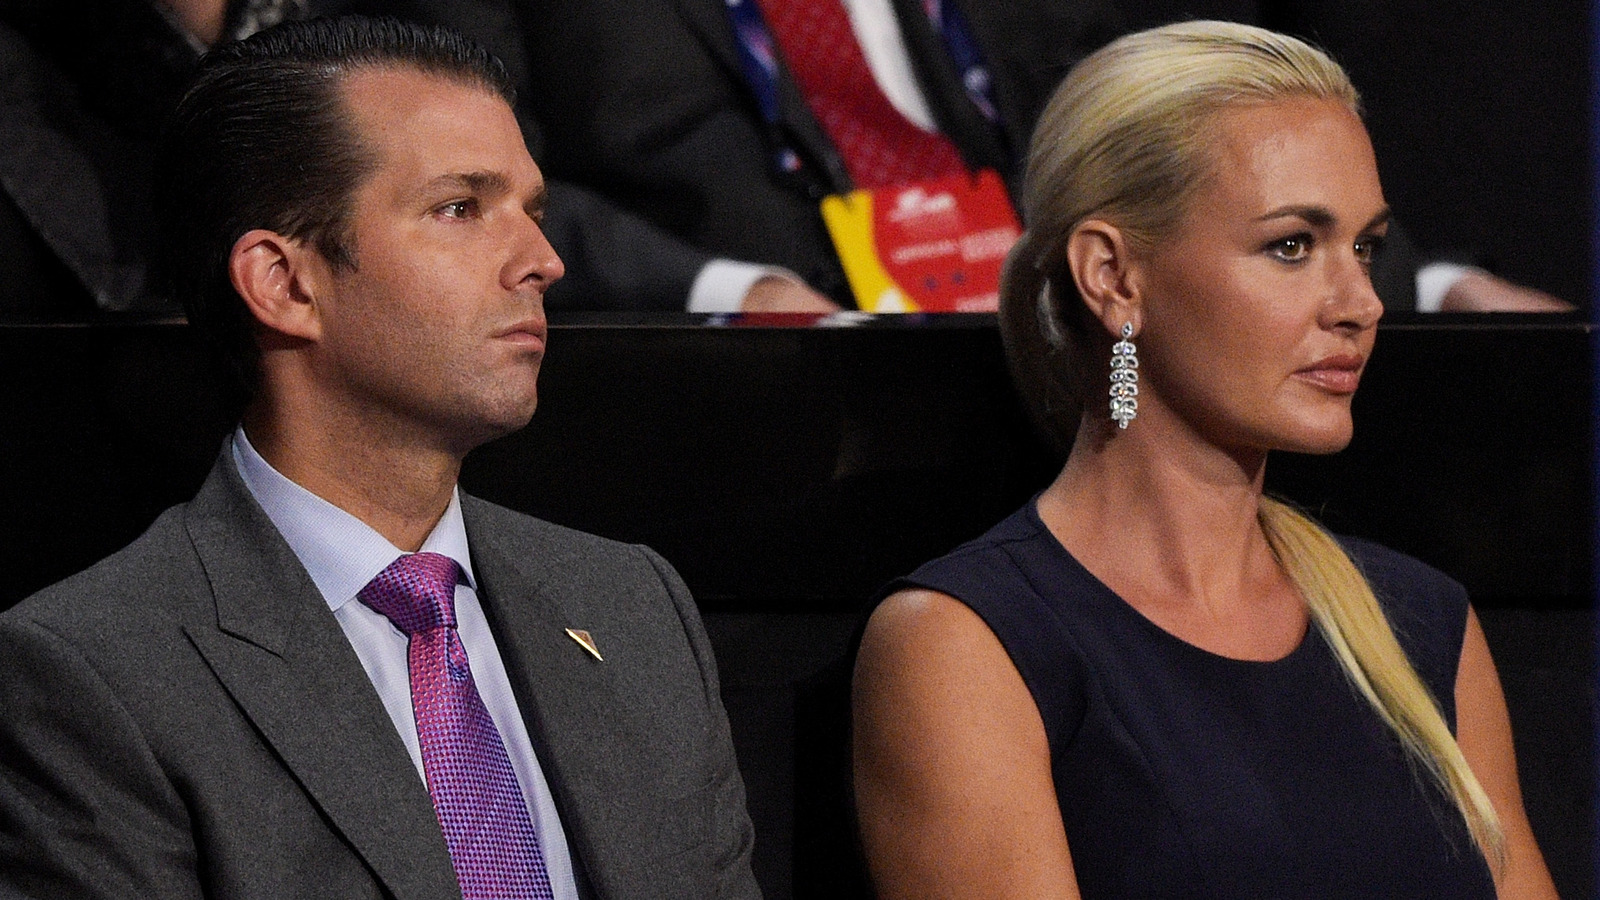 Donald Trump Jr. And Ex-Spouse Vanessa's Full Relationship Timeline